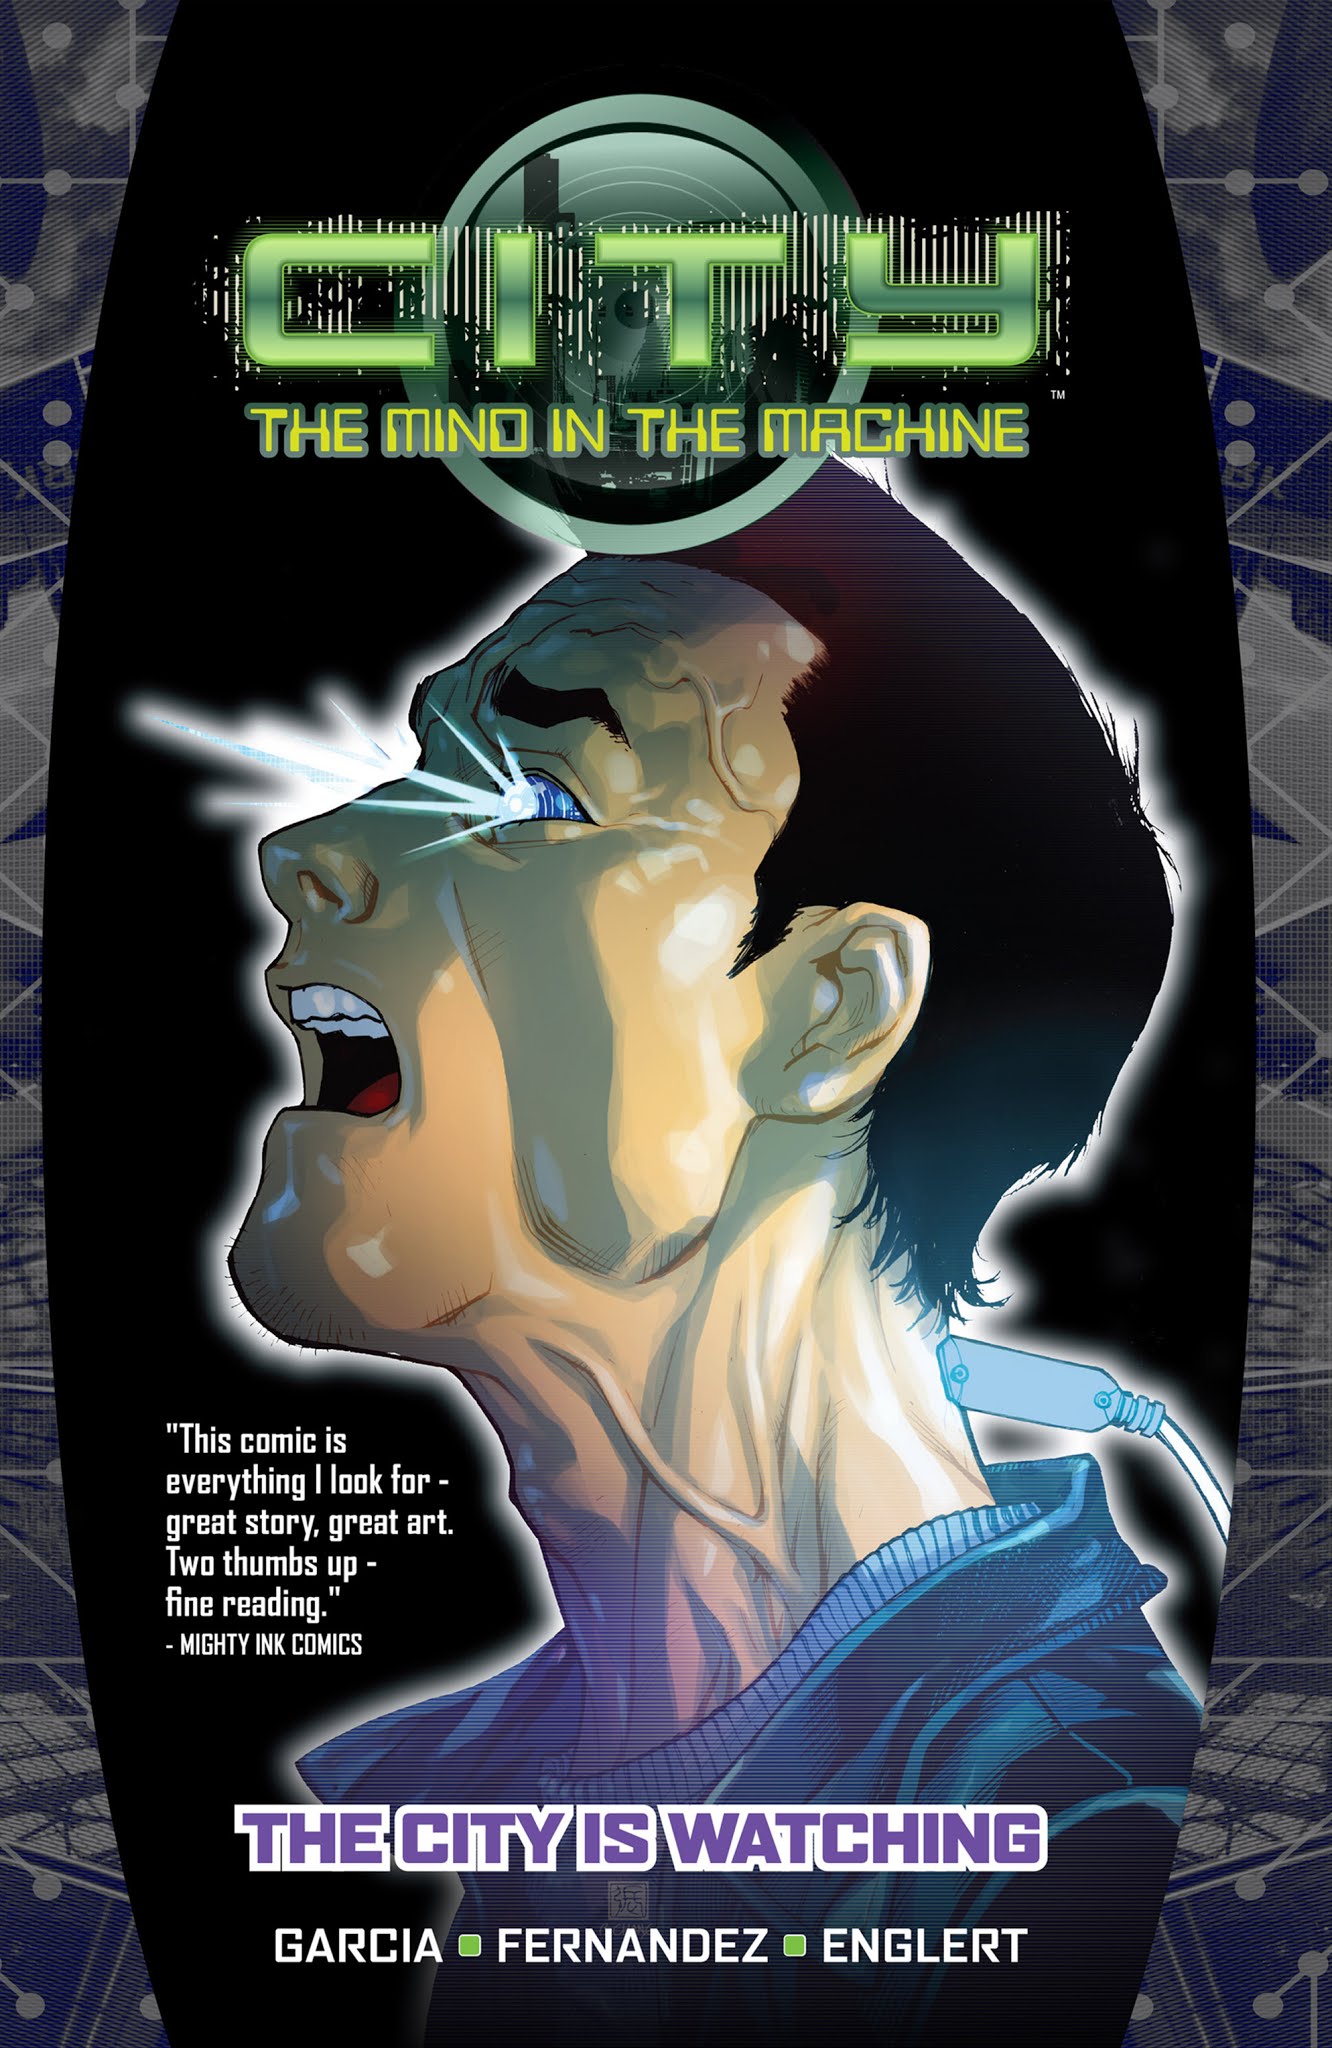 Read online City: The Mind in the Machine comic -  Issue # TPB - 1